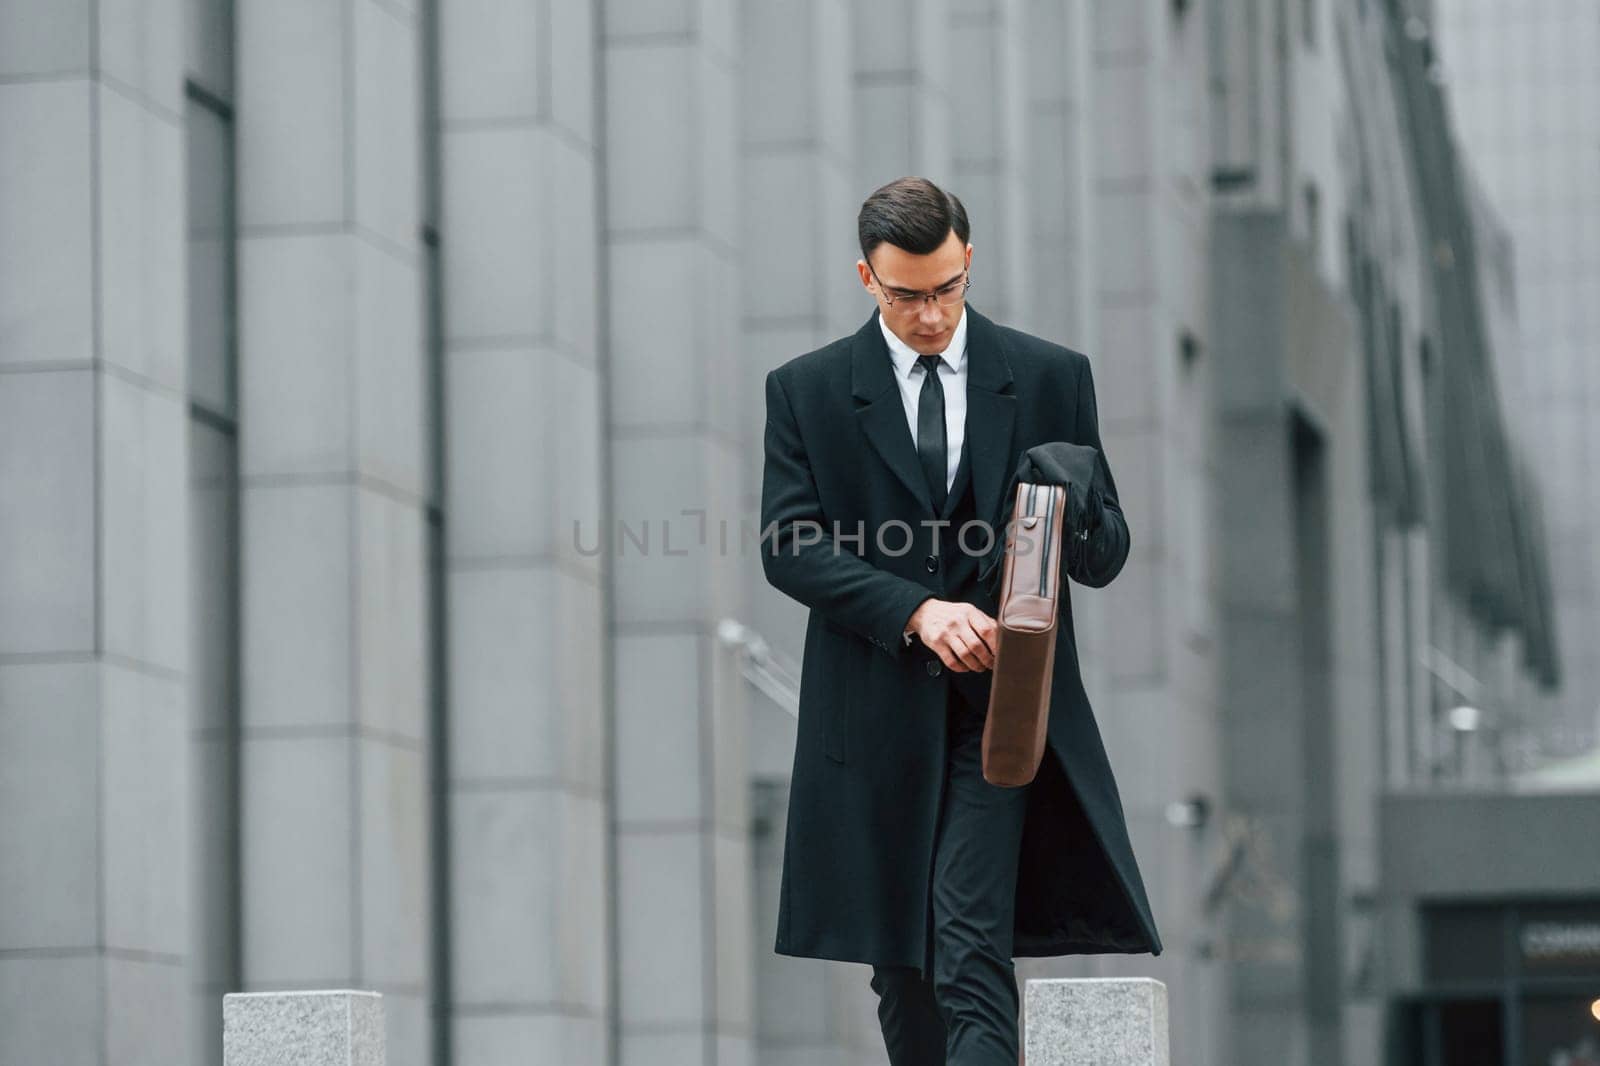 Holding brown bag in hands. Businessman in black suit and tie is outdoors in the city.